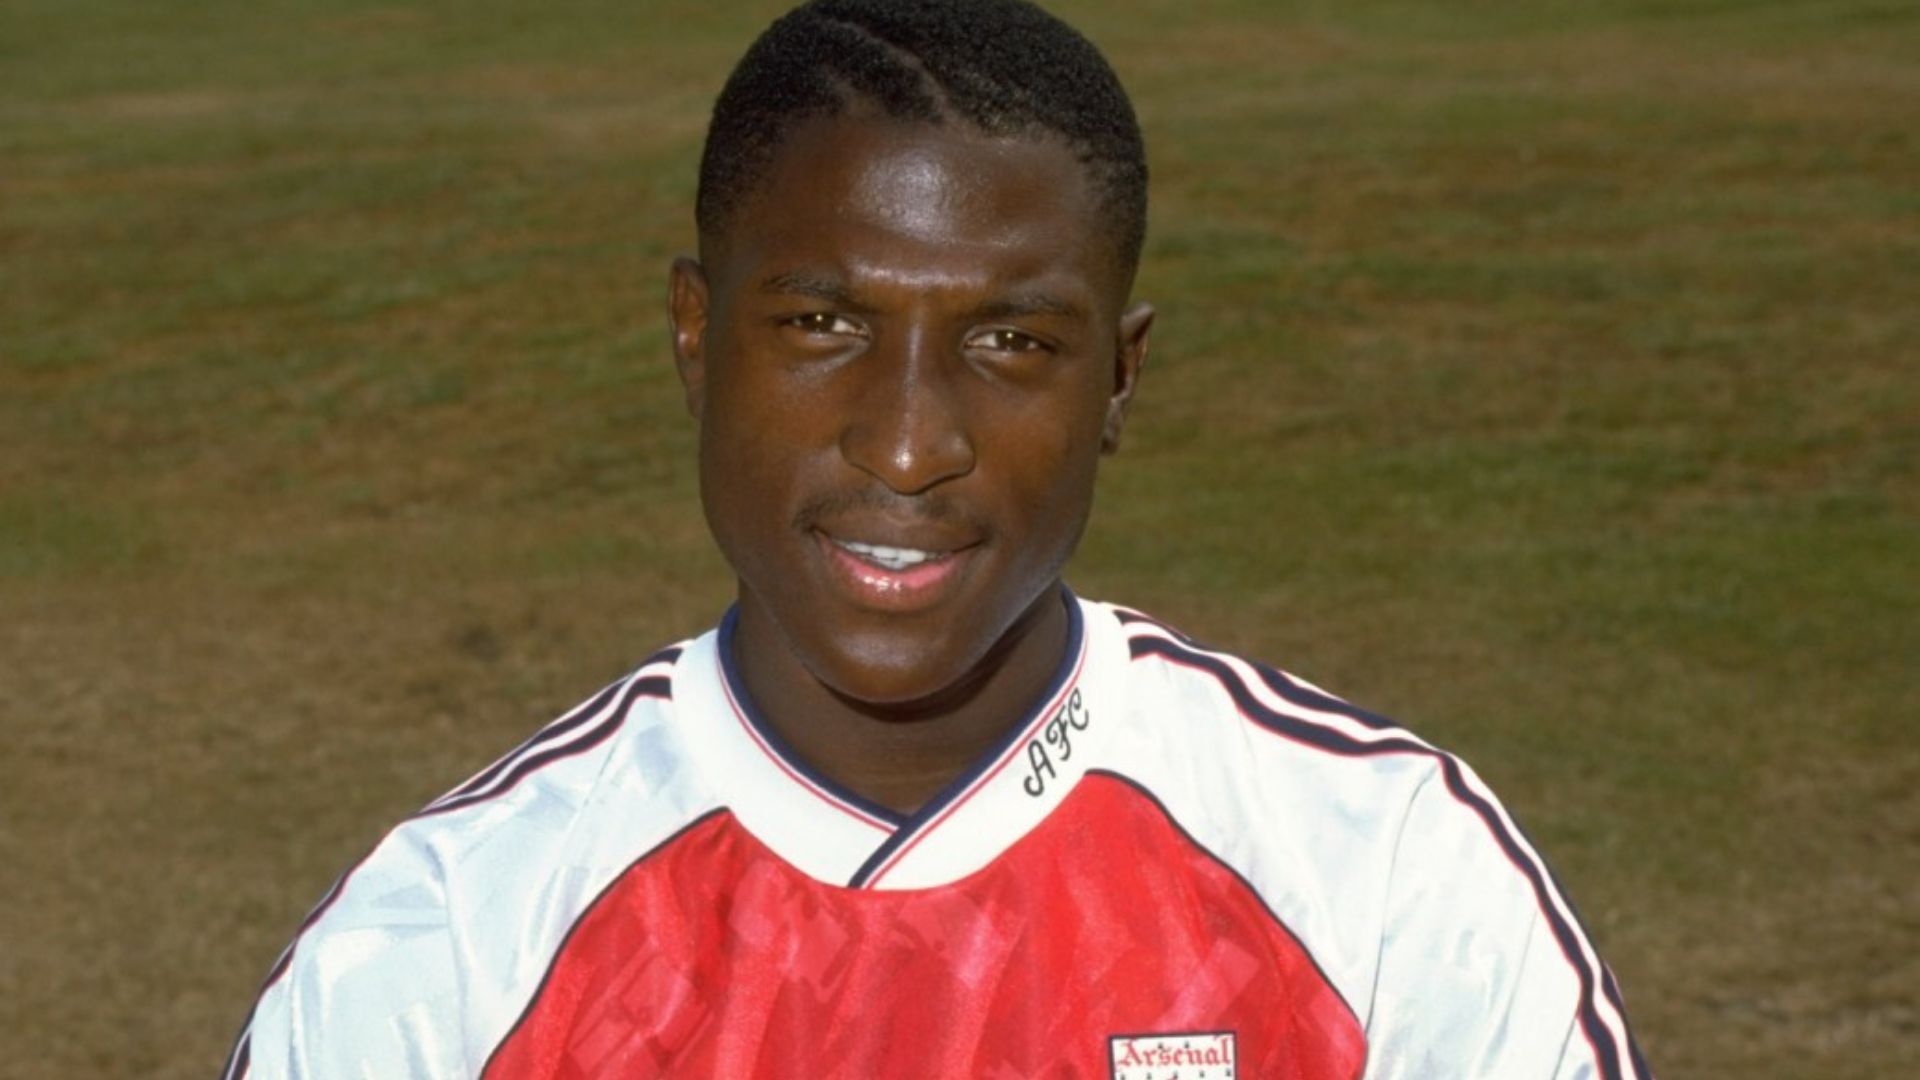 Arsenal and Everton Unite in Tribute to Kevin Campbell: A Football Legend Passes